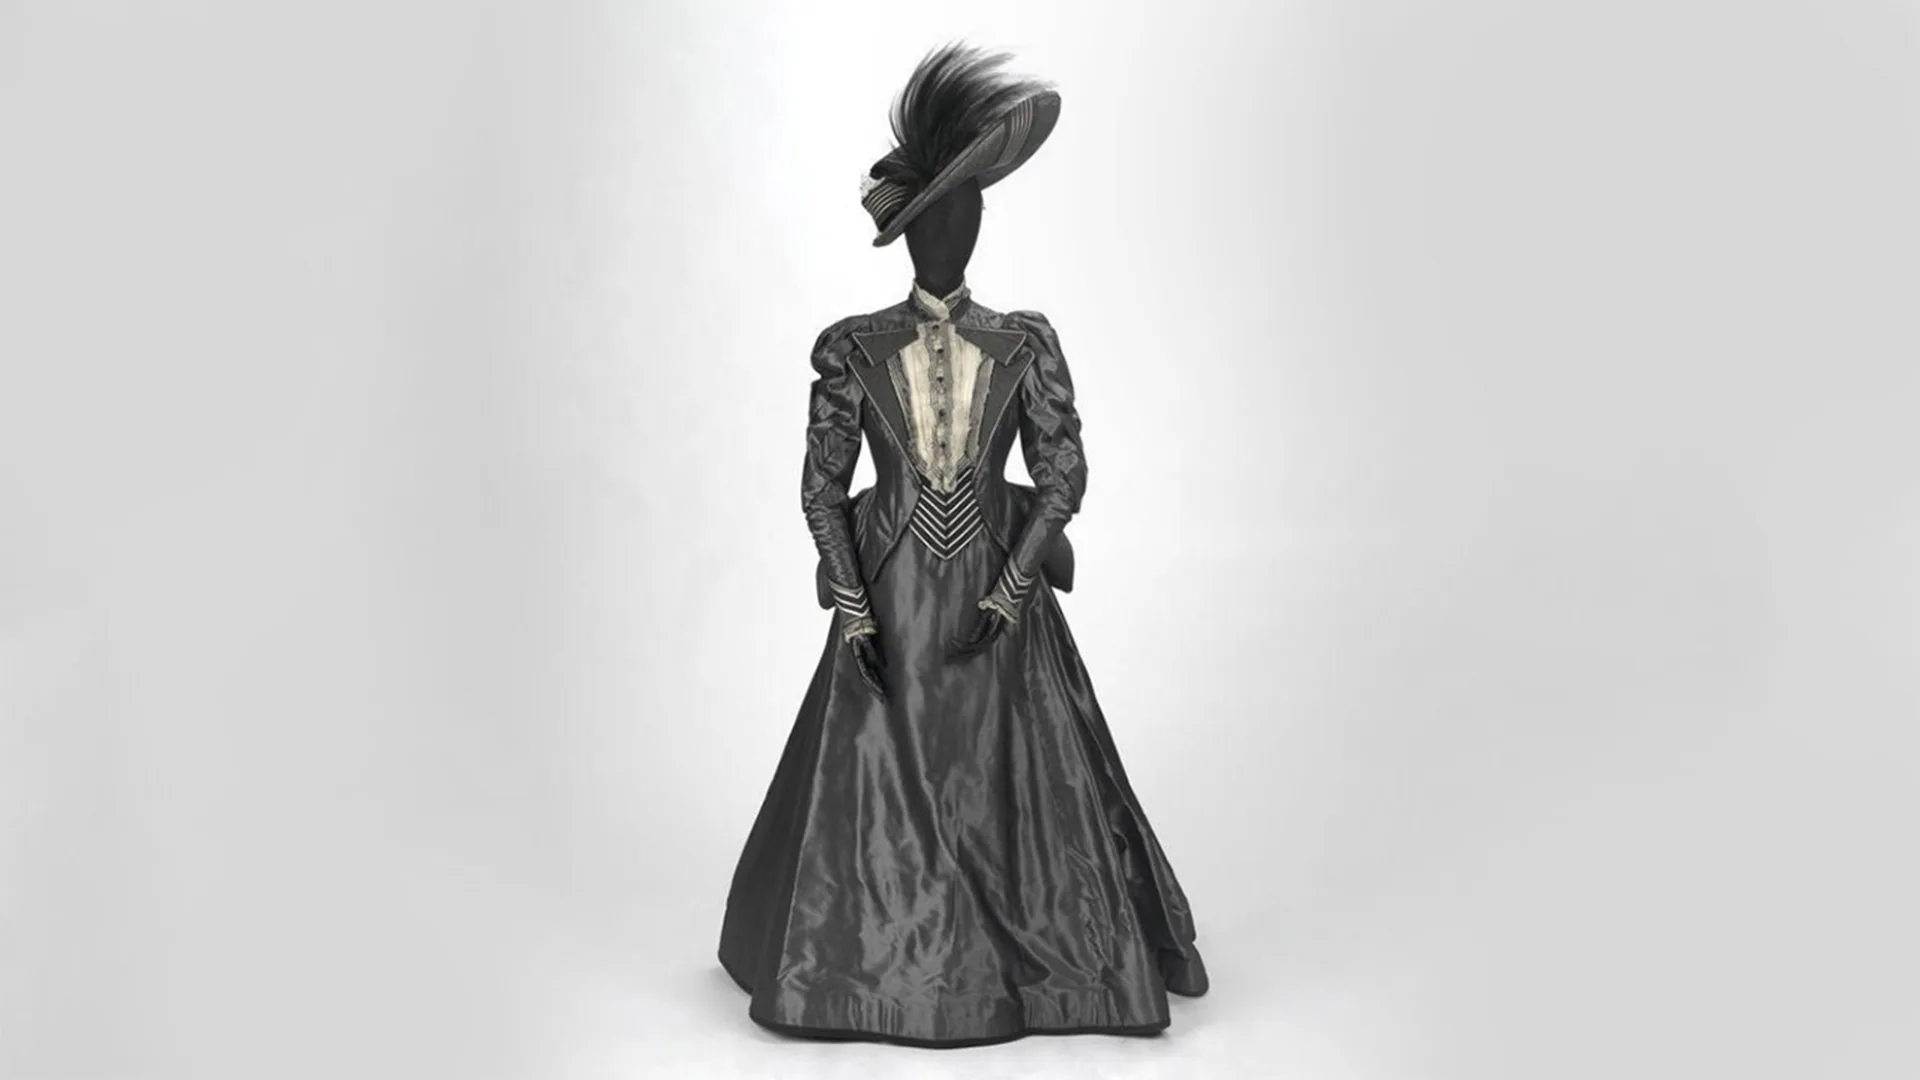 Importance of Being Earnest costume - a black dress and feather hat